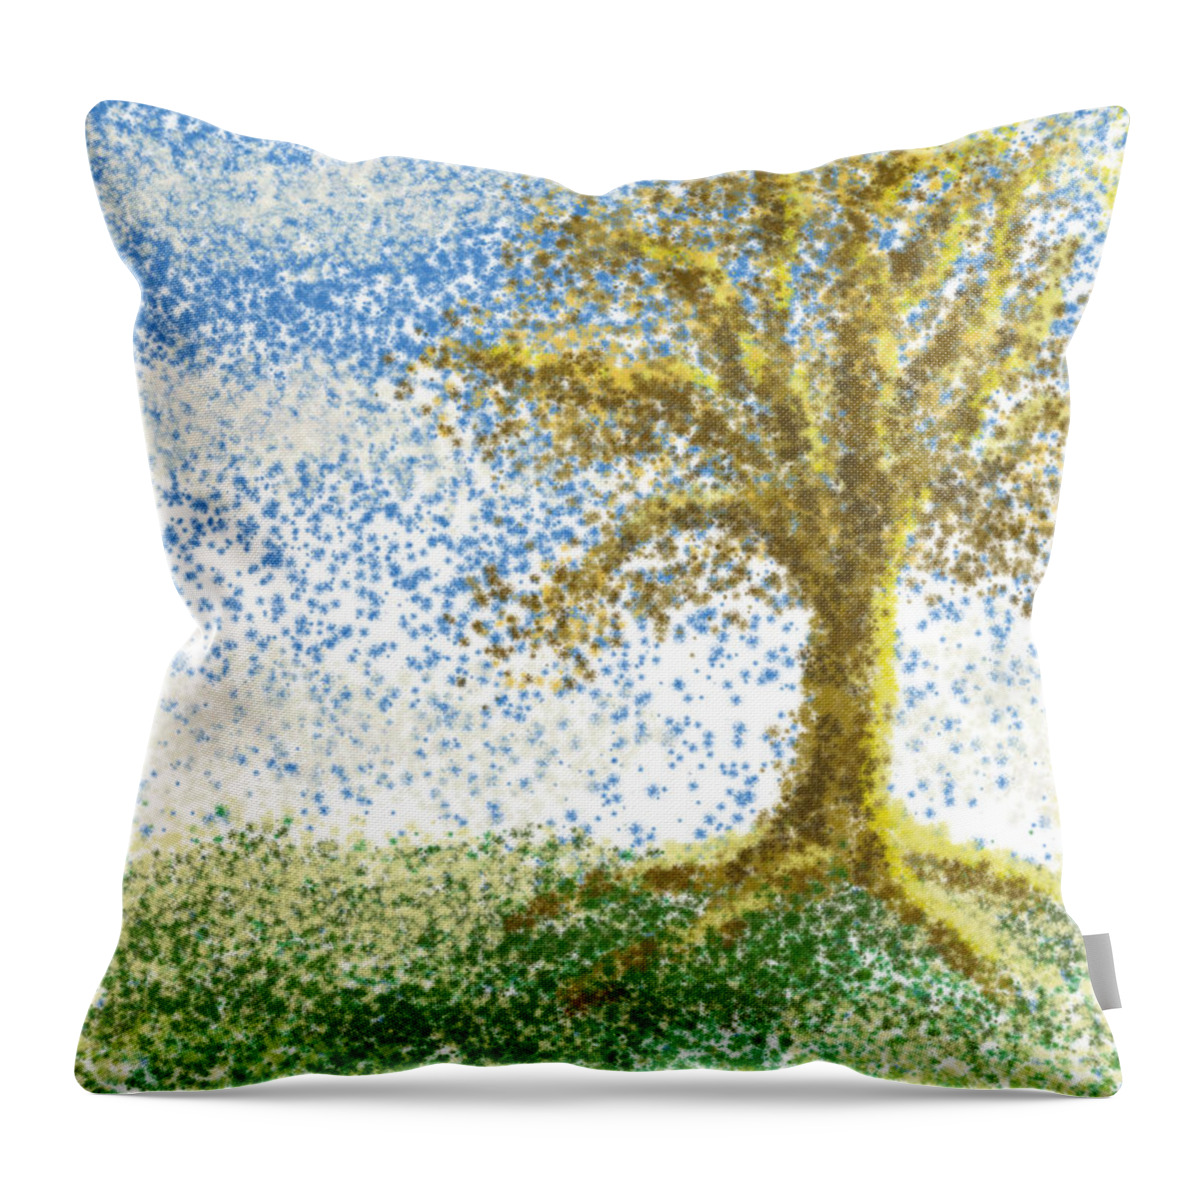 Digital Throw Pillow featuring the digital art Digital Dot Painting by Stacy C Bottoms